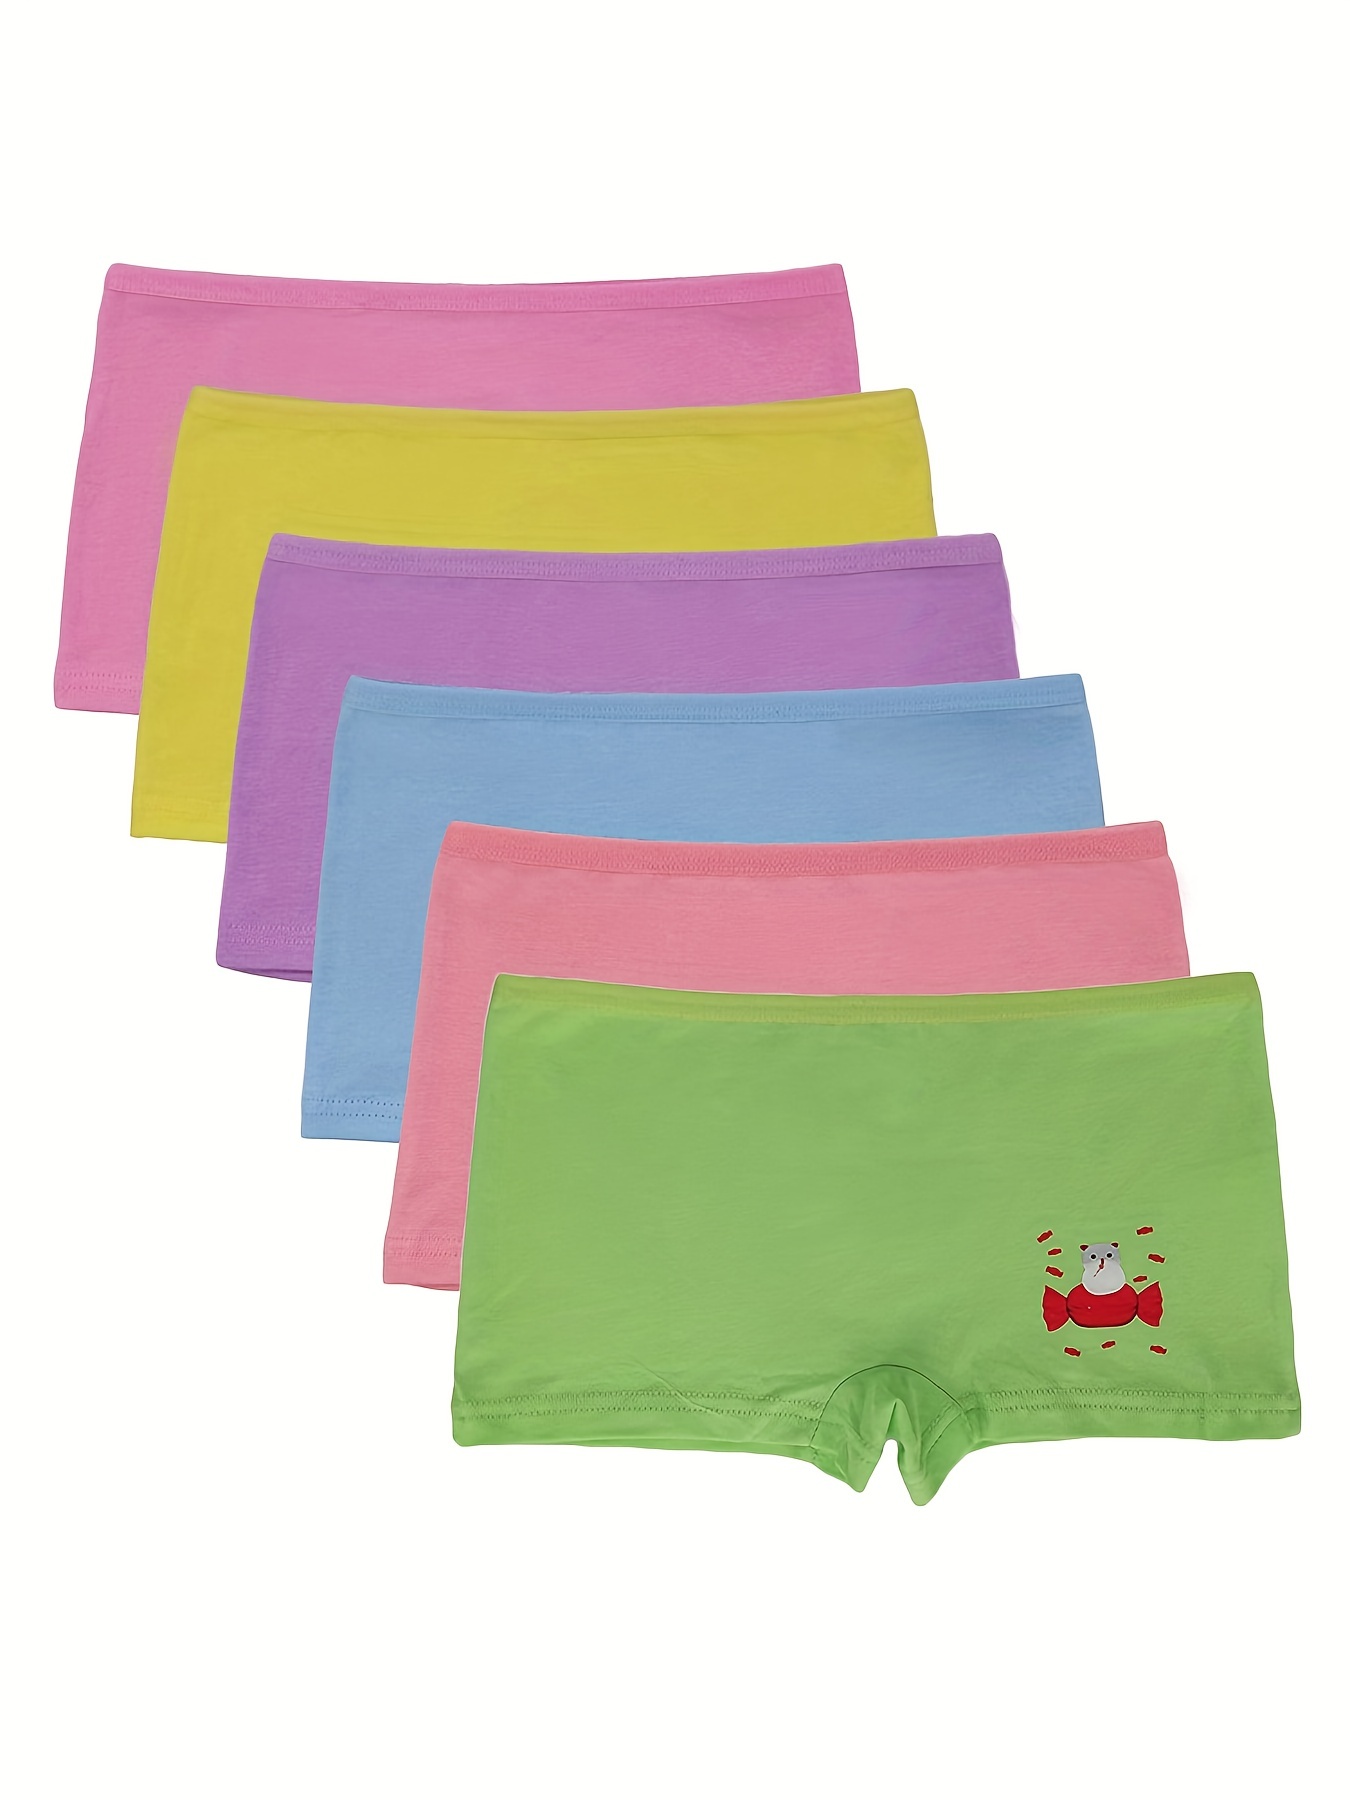 5 Pcs/lot Girls Panties Cotton Kids Beautiful Underwear Cartoon Children  Briefs Girls Breathable Triangle Underpants For Girls Color: 5-20GS003, Kid  Size: L (For 5-7 Years)